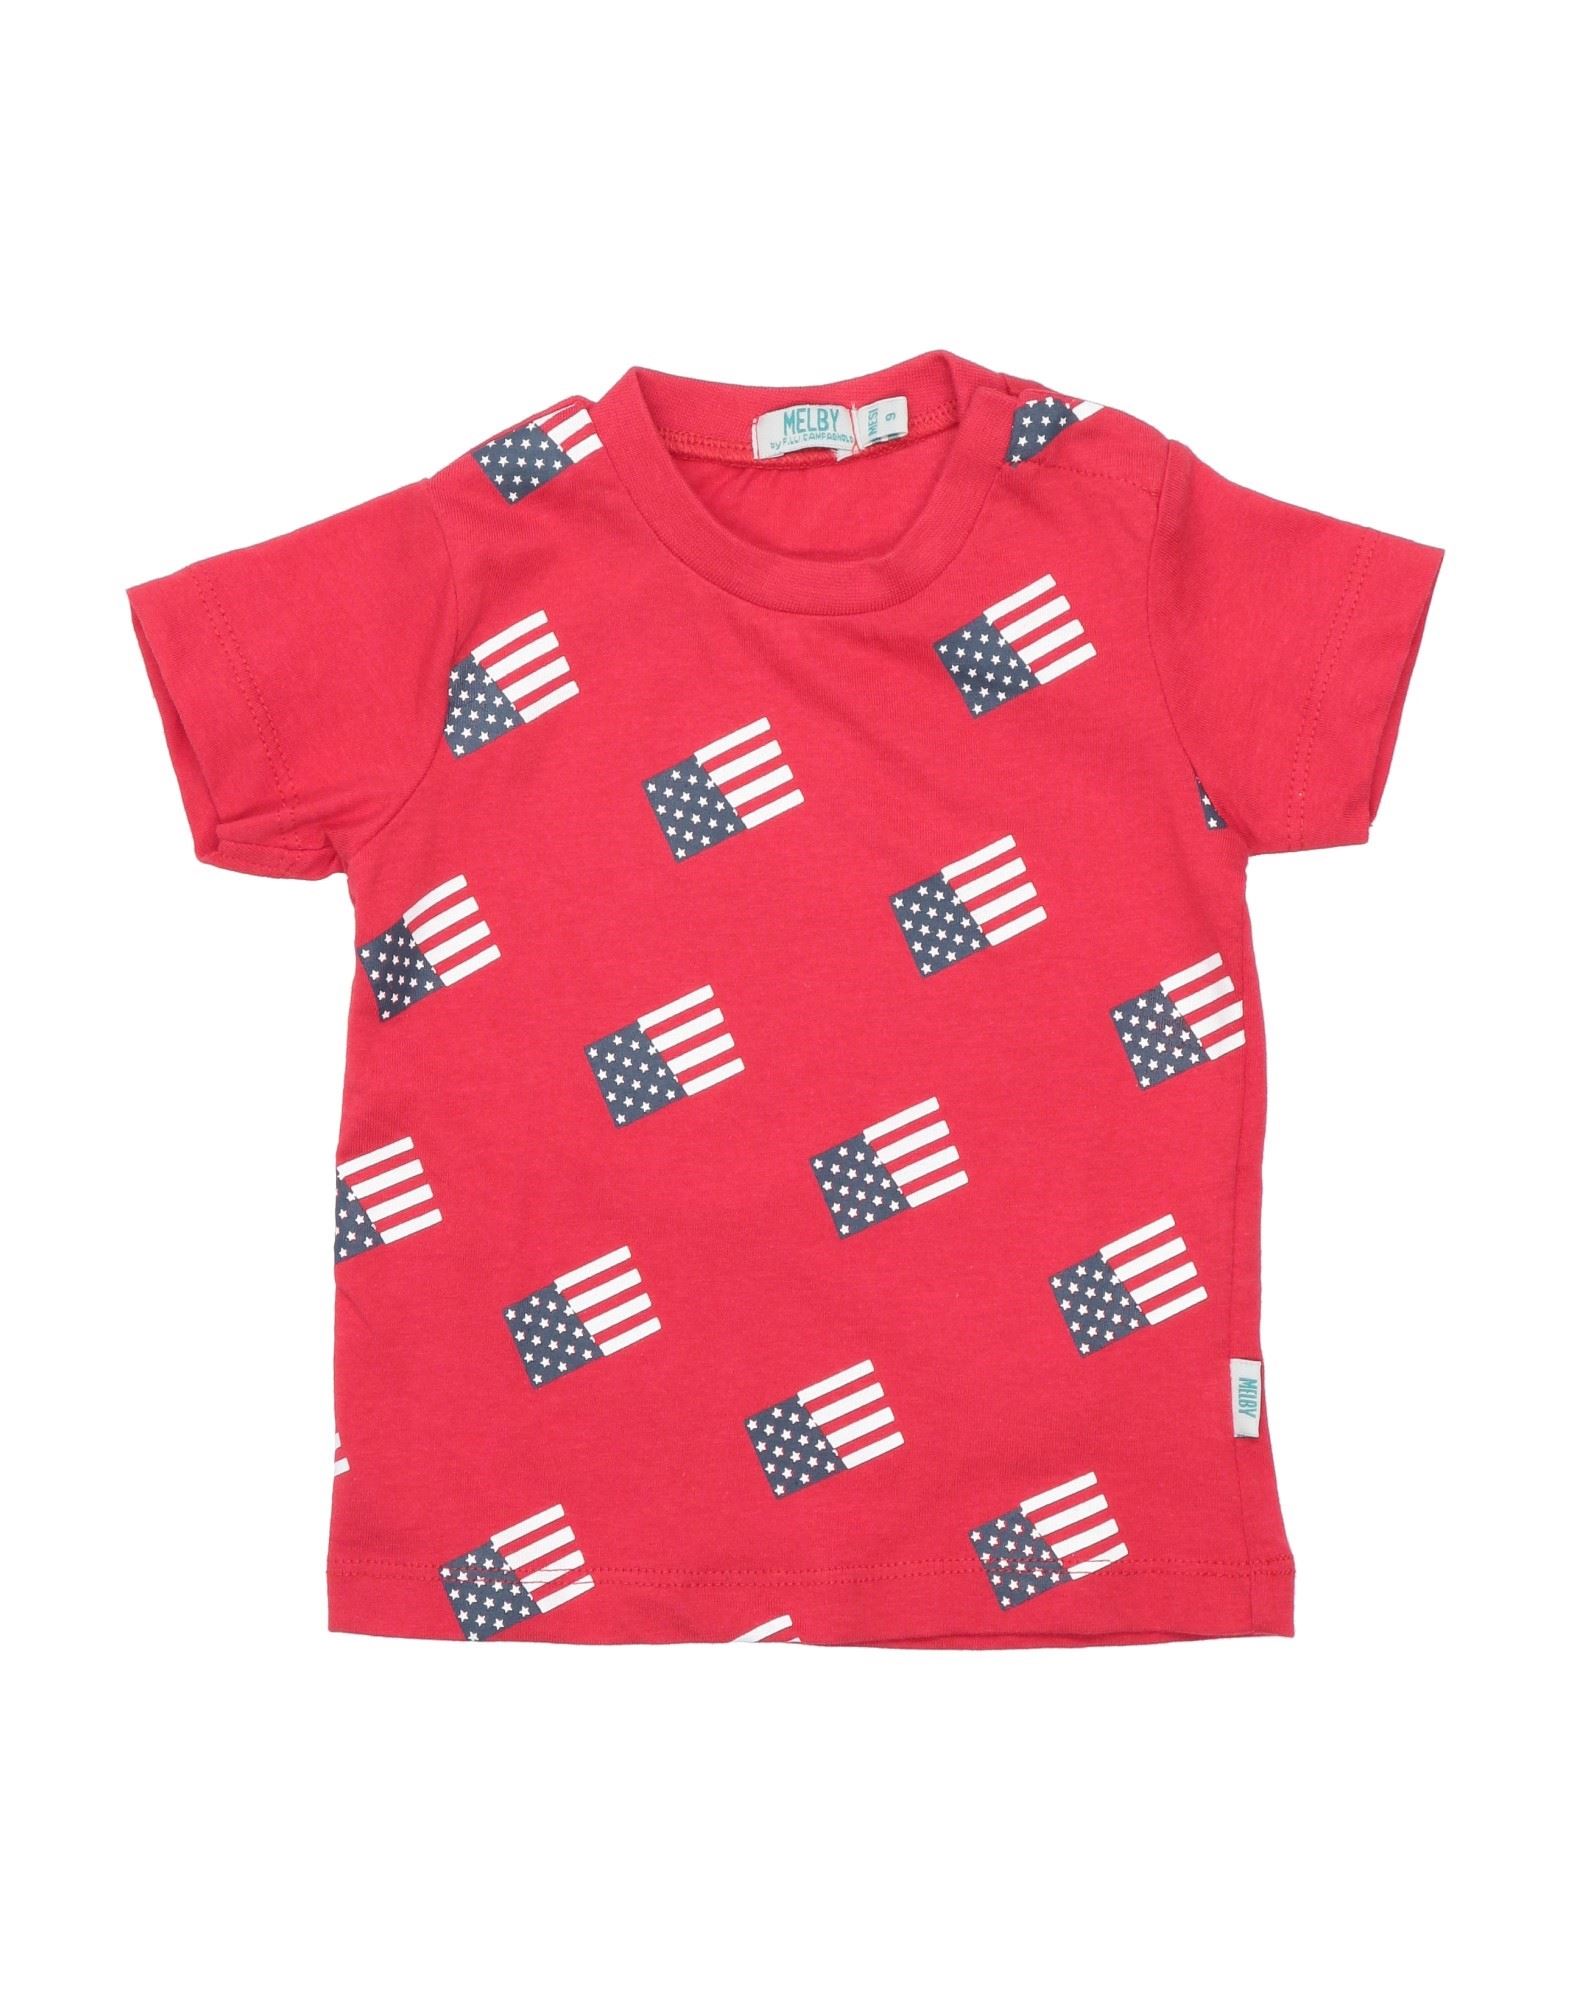 Melby Kids'  T-shirts In Red